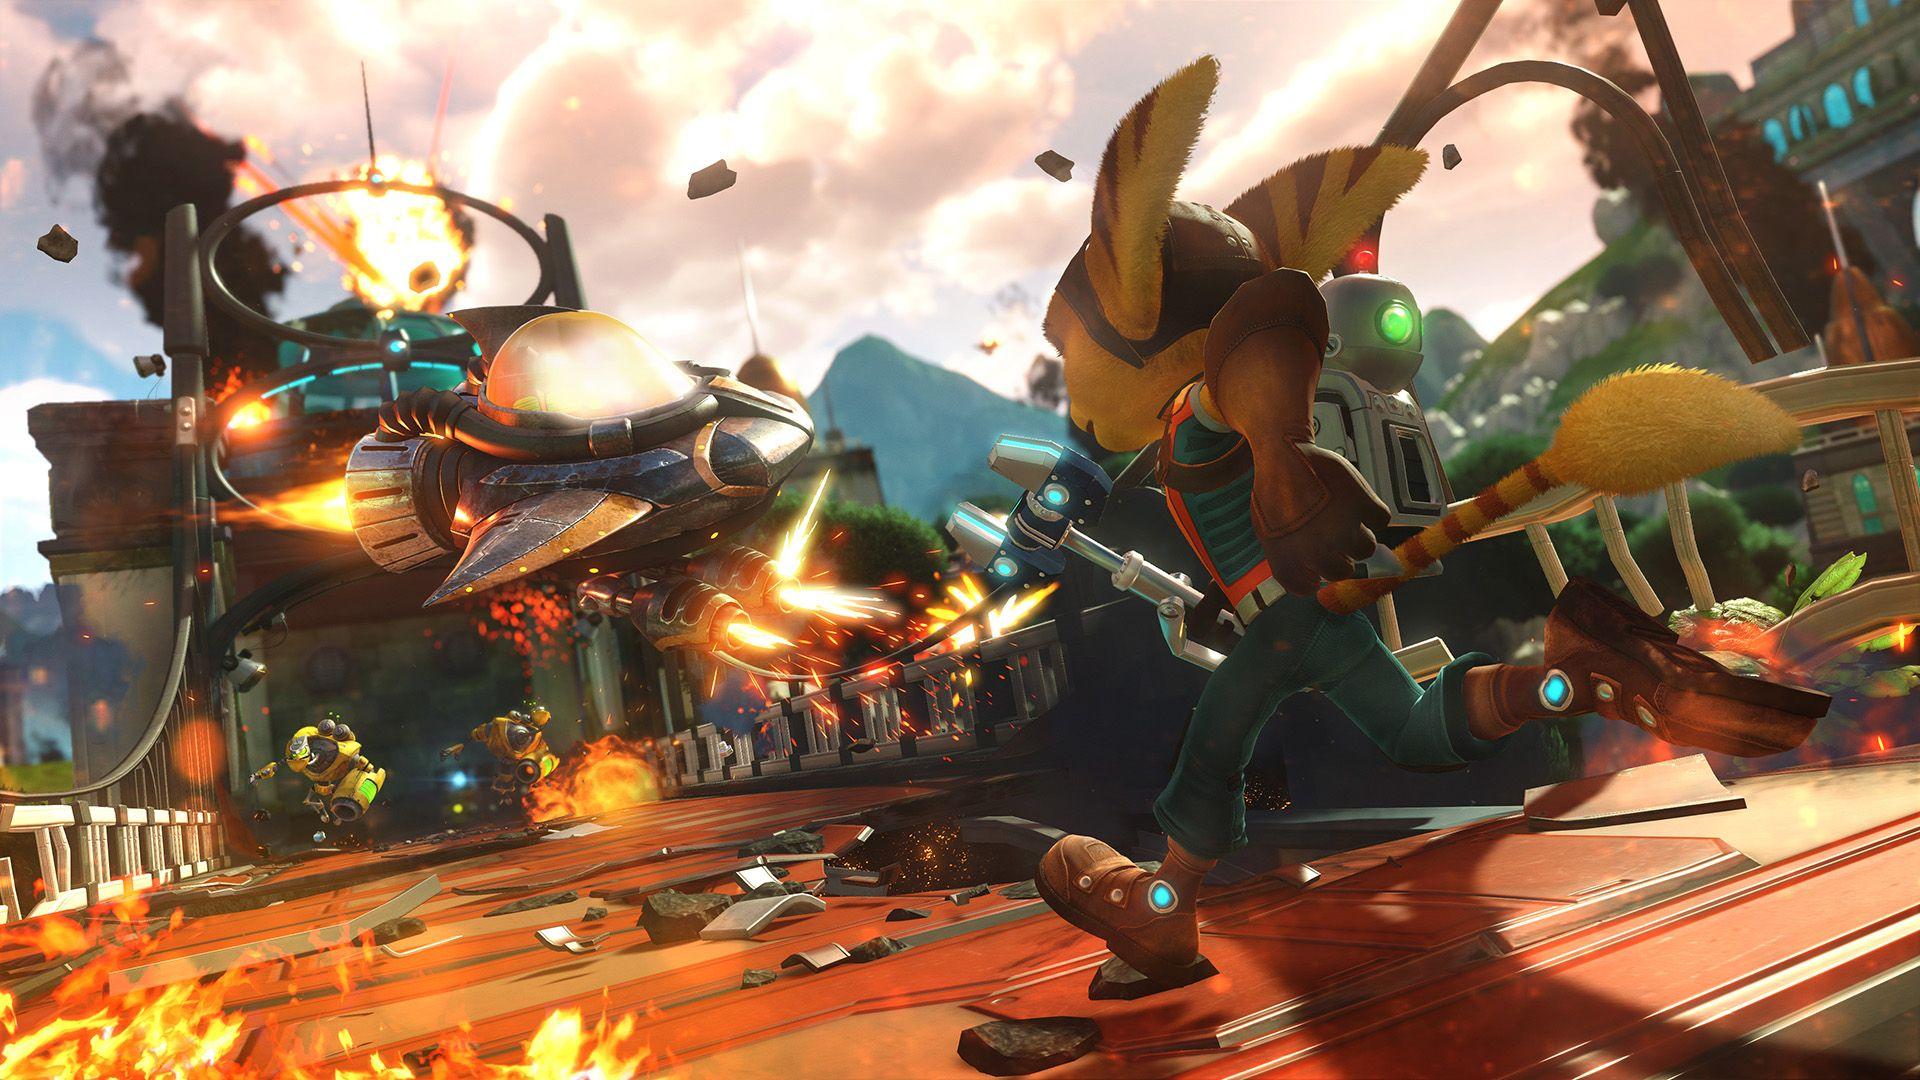 Ratchet & Clank Collection explodes onto Vita This summer 29th